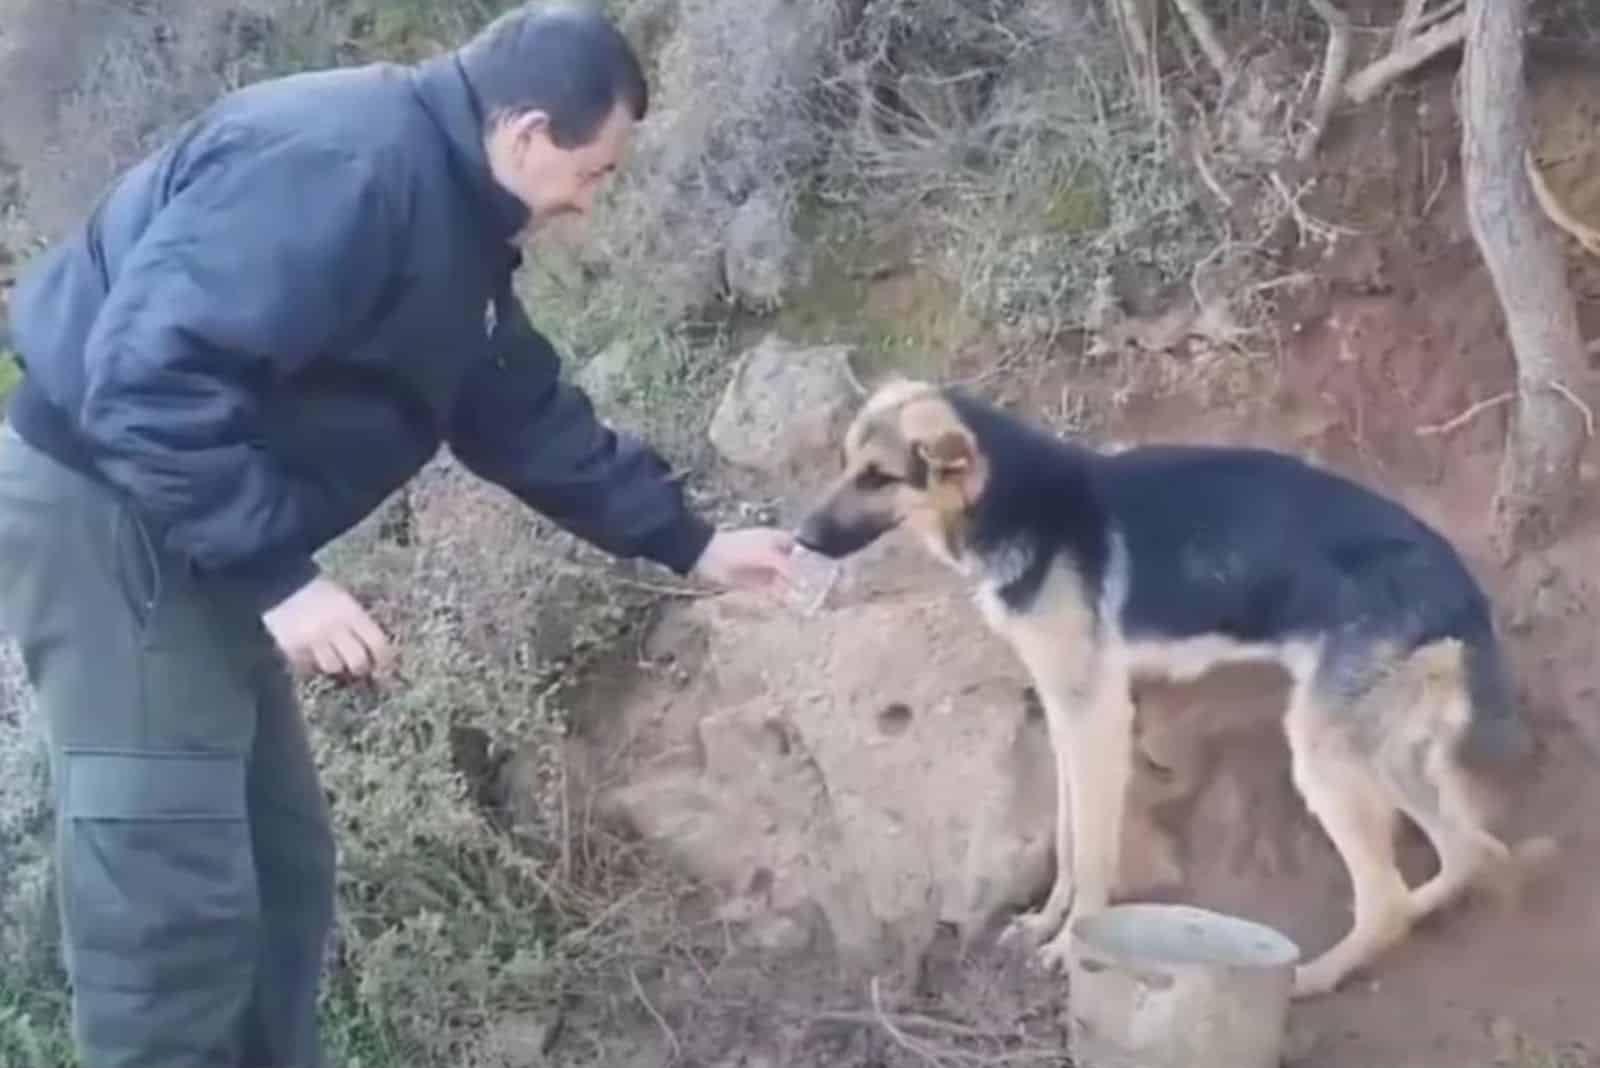 Heartbreaking: Rescuers Save German Shepherd Chained To A Tree